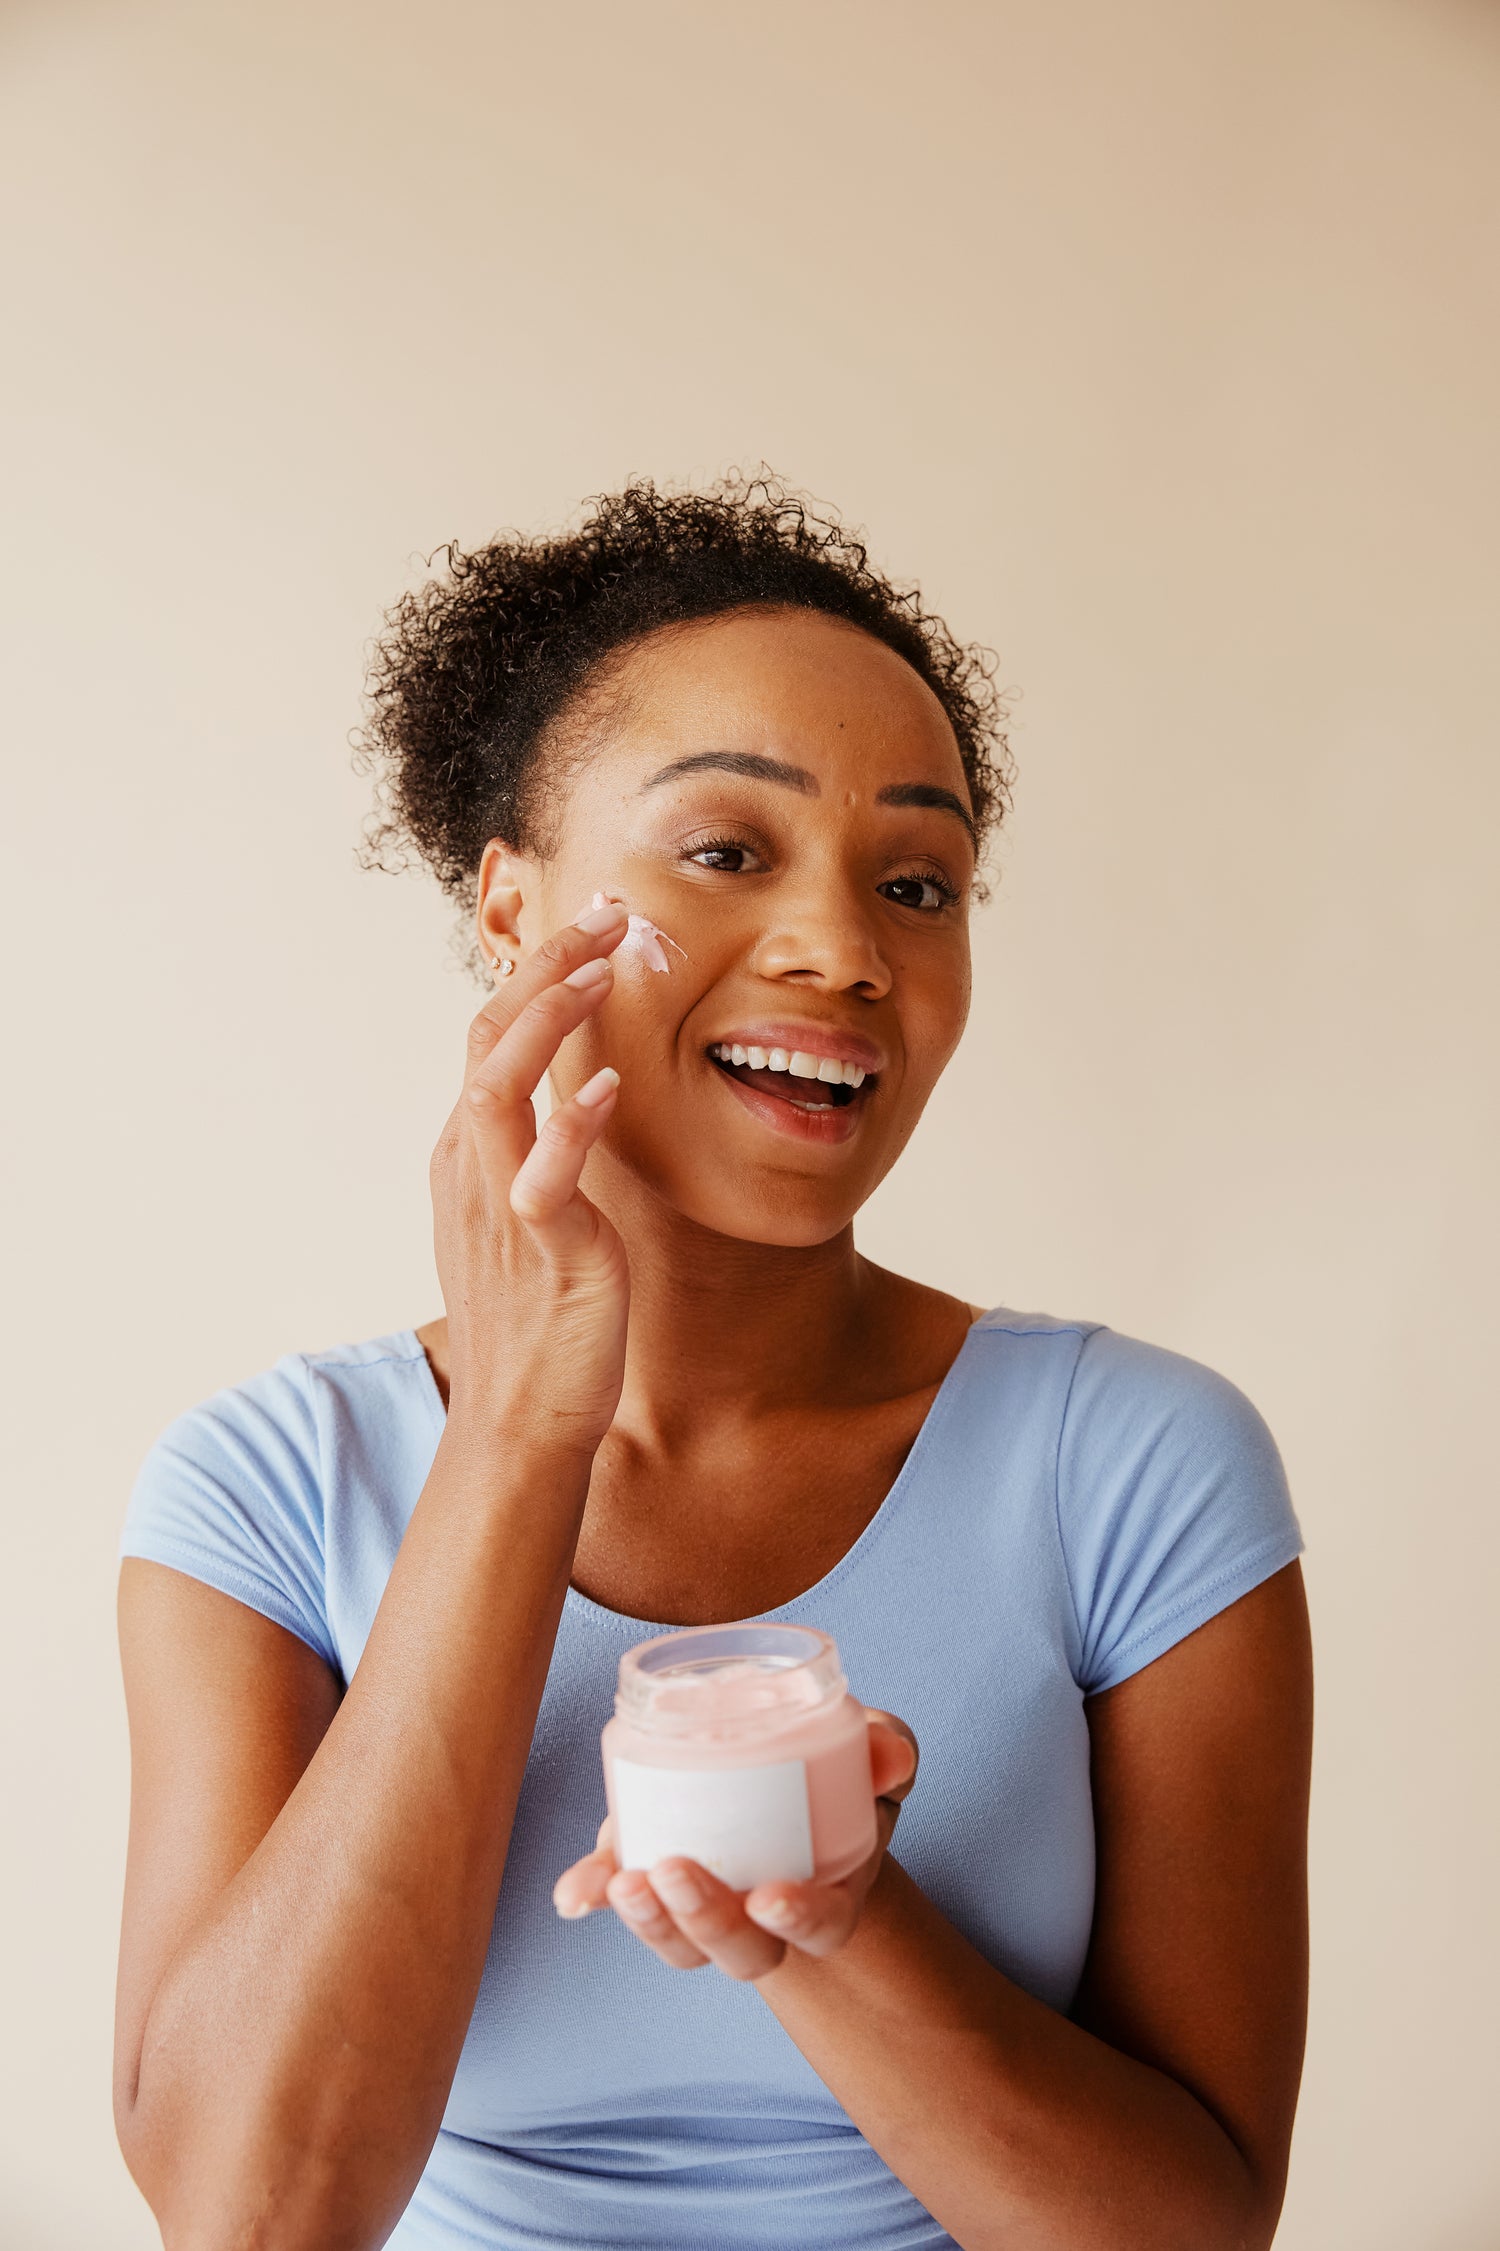 A women smiles and applying face moisturizer